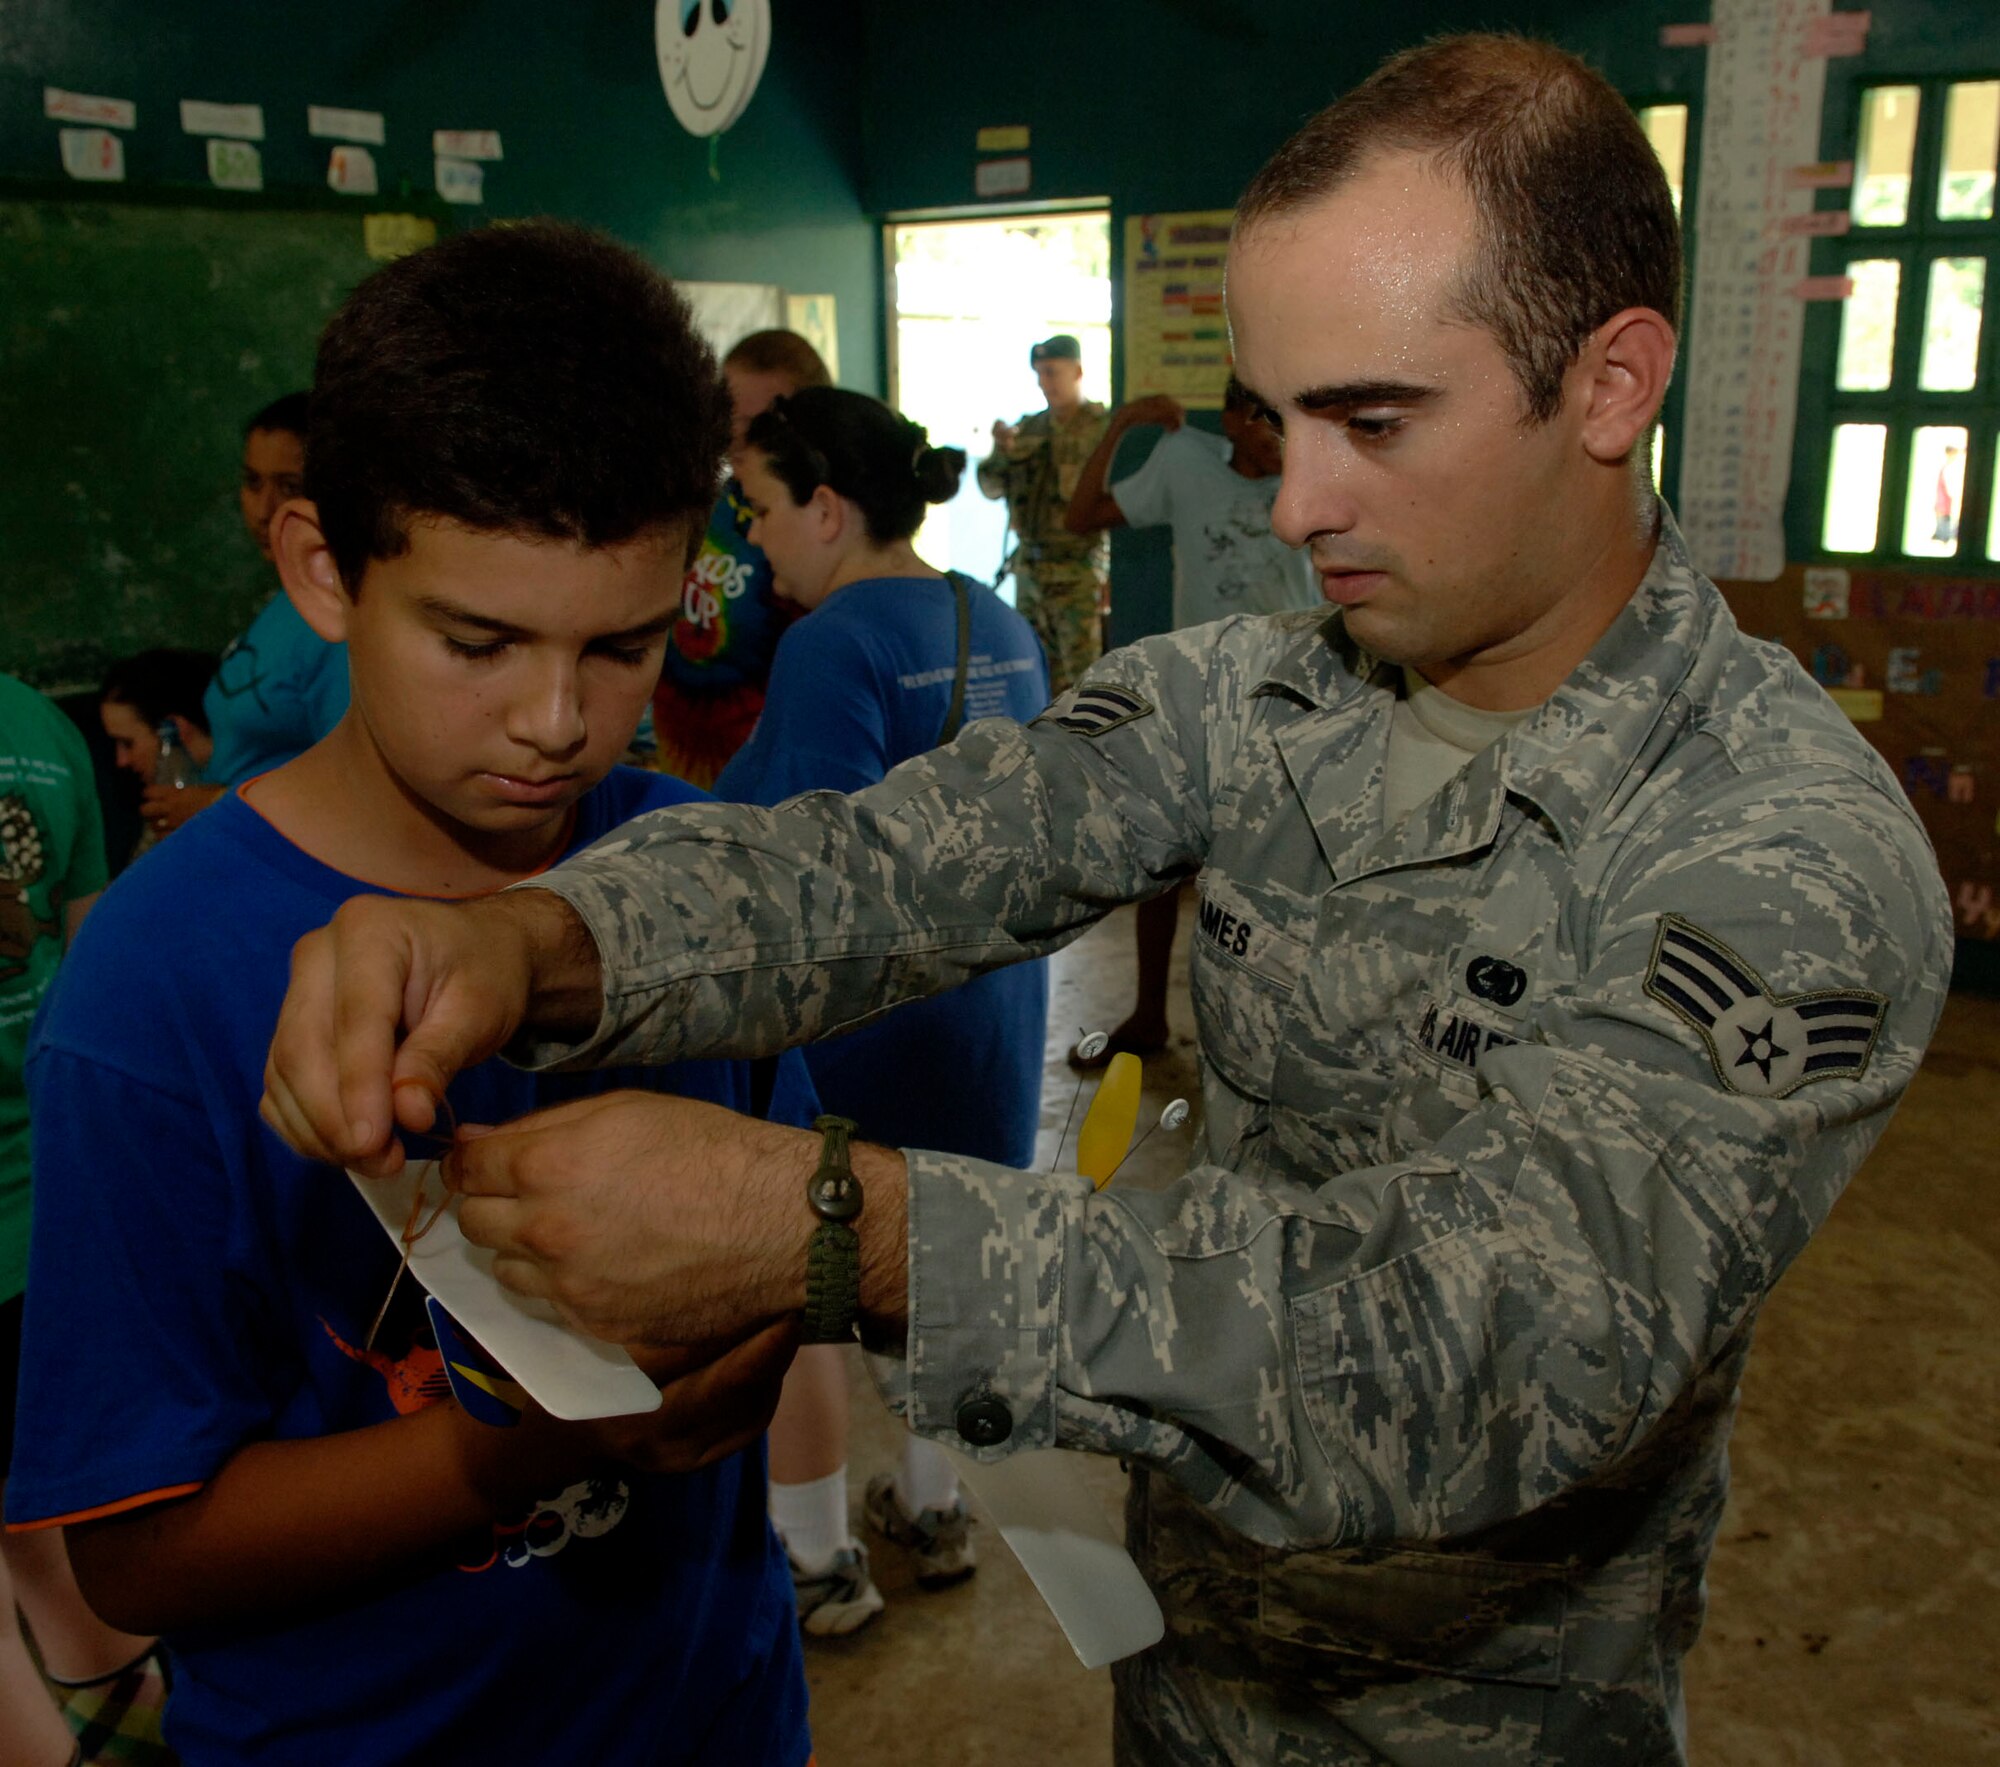 Senior Airman Alex James, 820th Expeditionary RED HORSE Squadron, helps children assemble rubber band airplanes at the Sansonsito School July 12. (U.S. Air Force photo/Tech. Sgt. Eric Petosky)